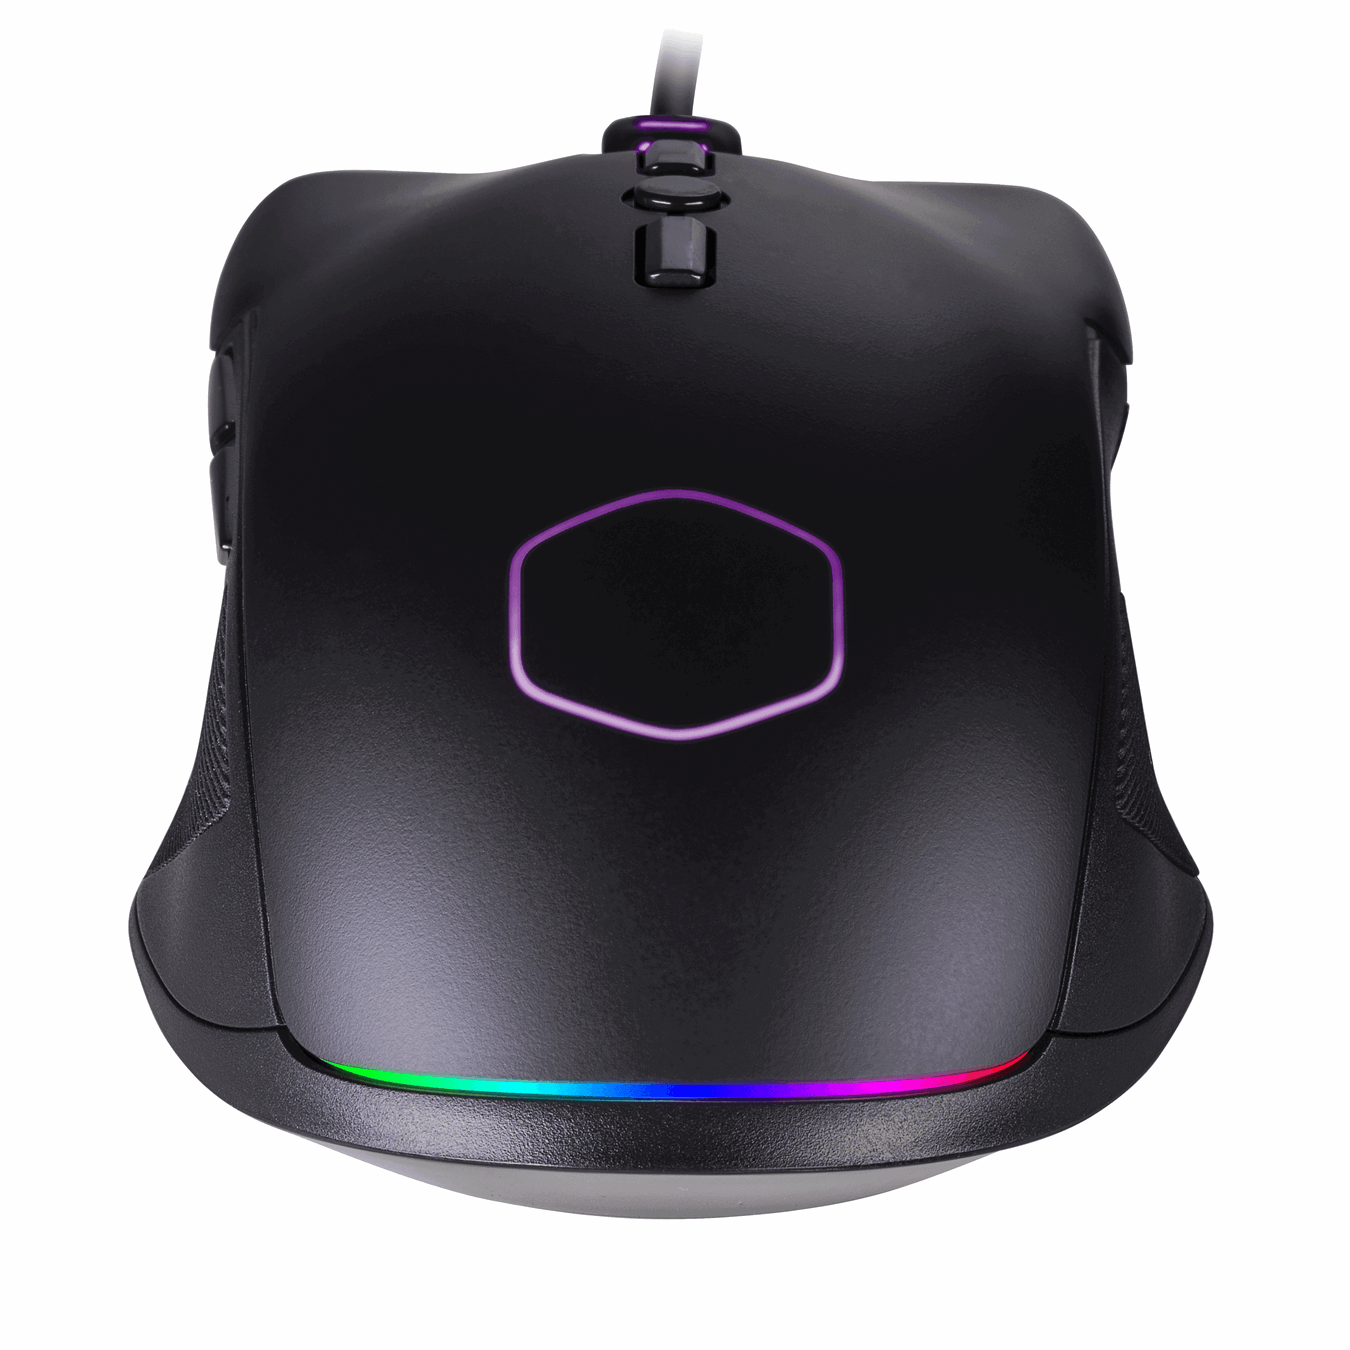 CM310 Gaming Mouse - Ambidextrous design caters to both hands and all grip types